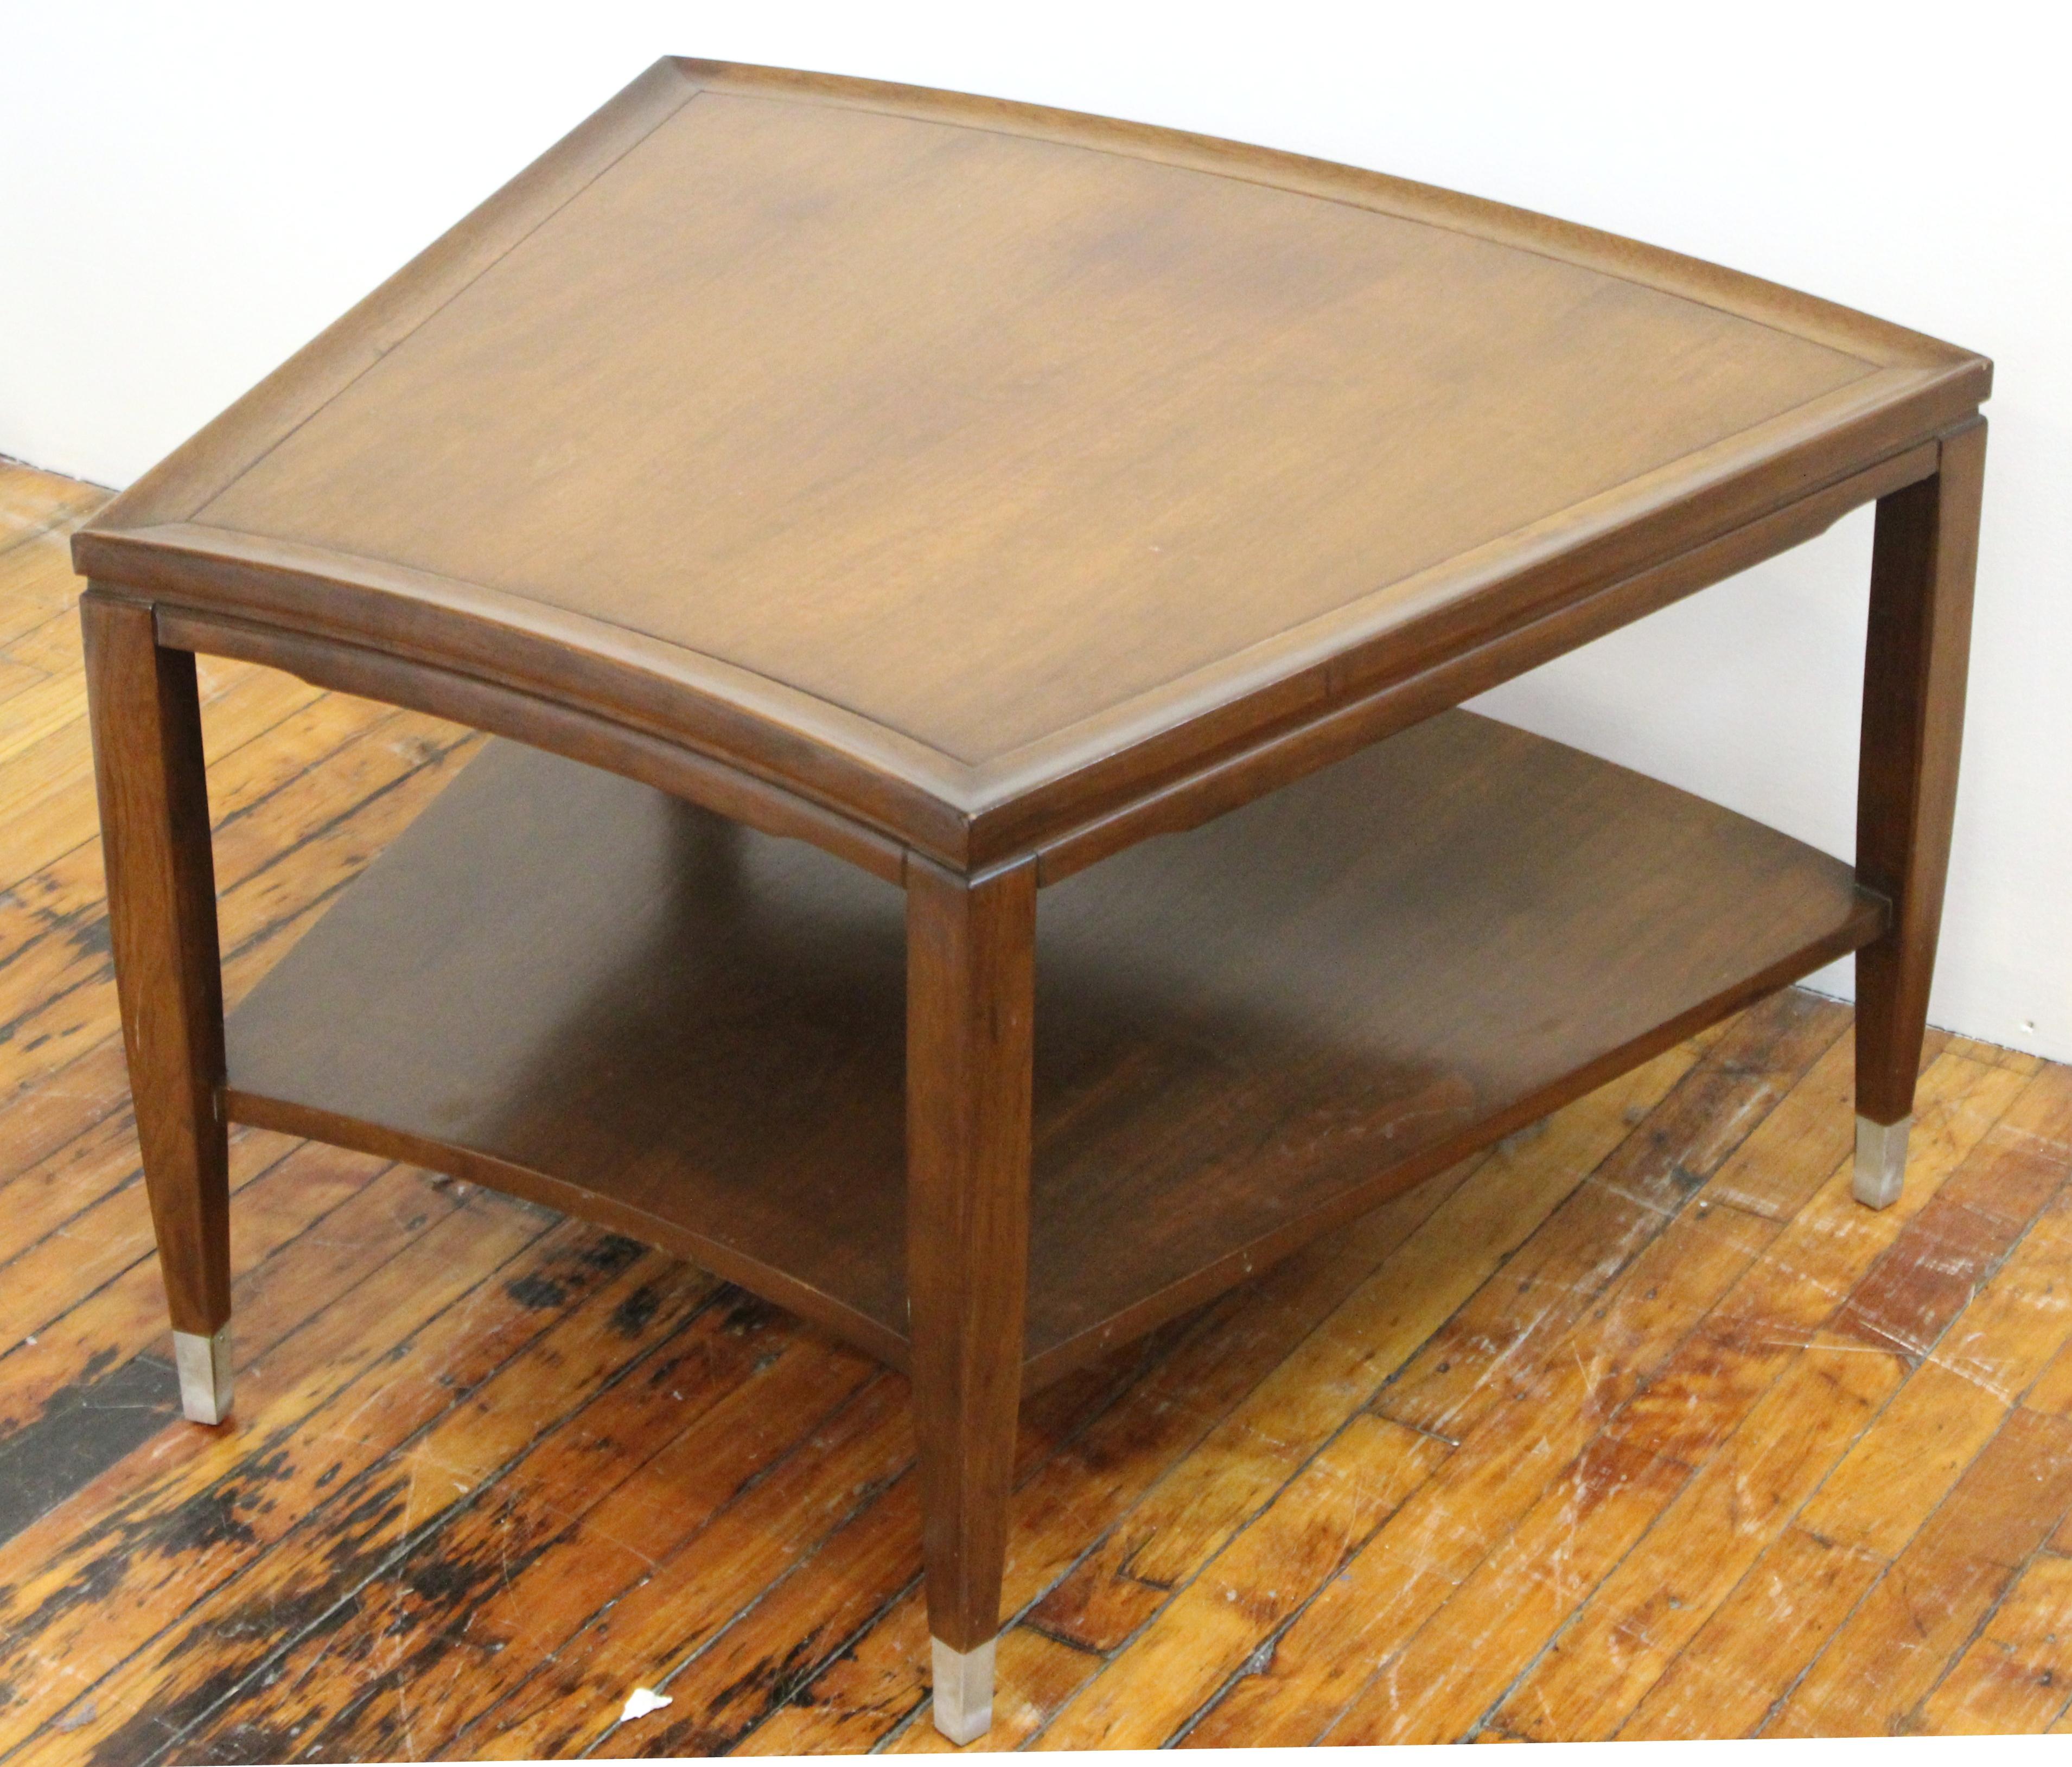 Mid-Century Modern two-tiered side table or corner table with a slightly angled shape and metal covered feet. The piece is in great vintage condition, with age-appropriate wear.